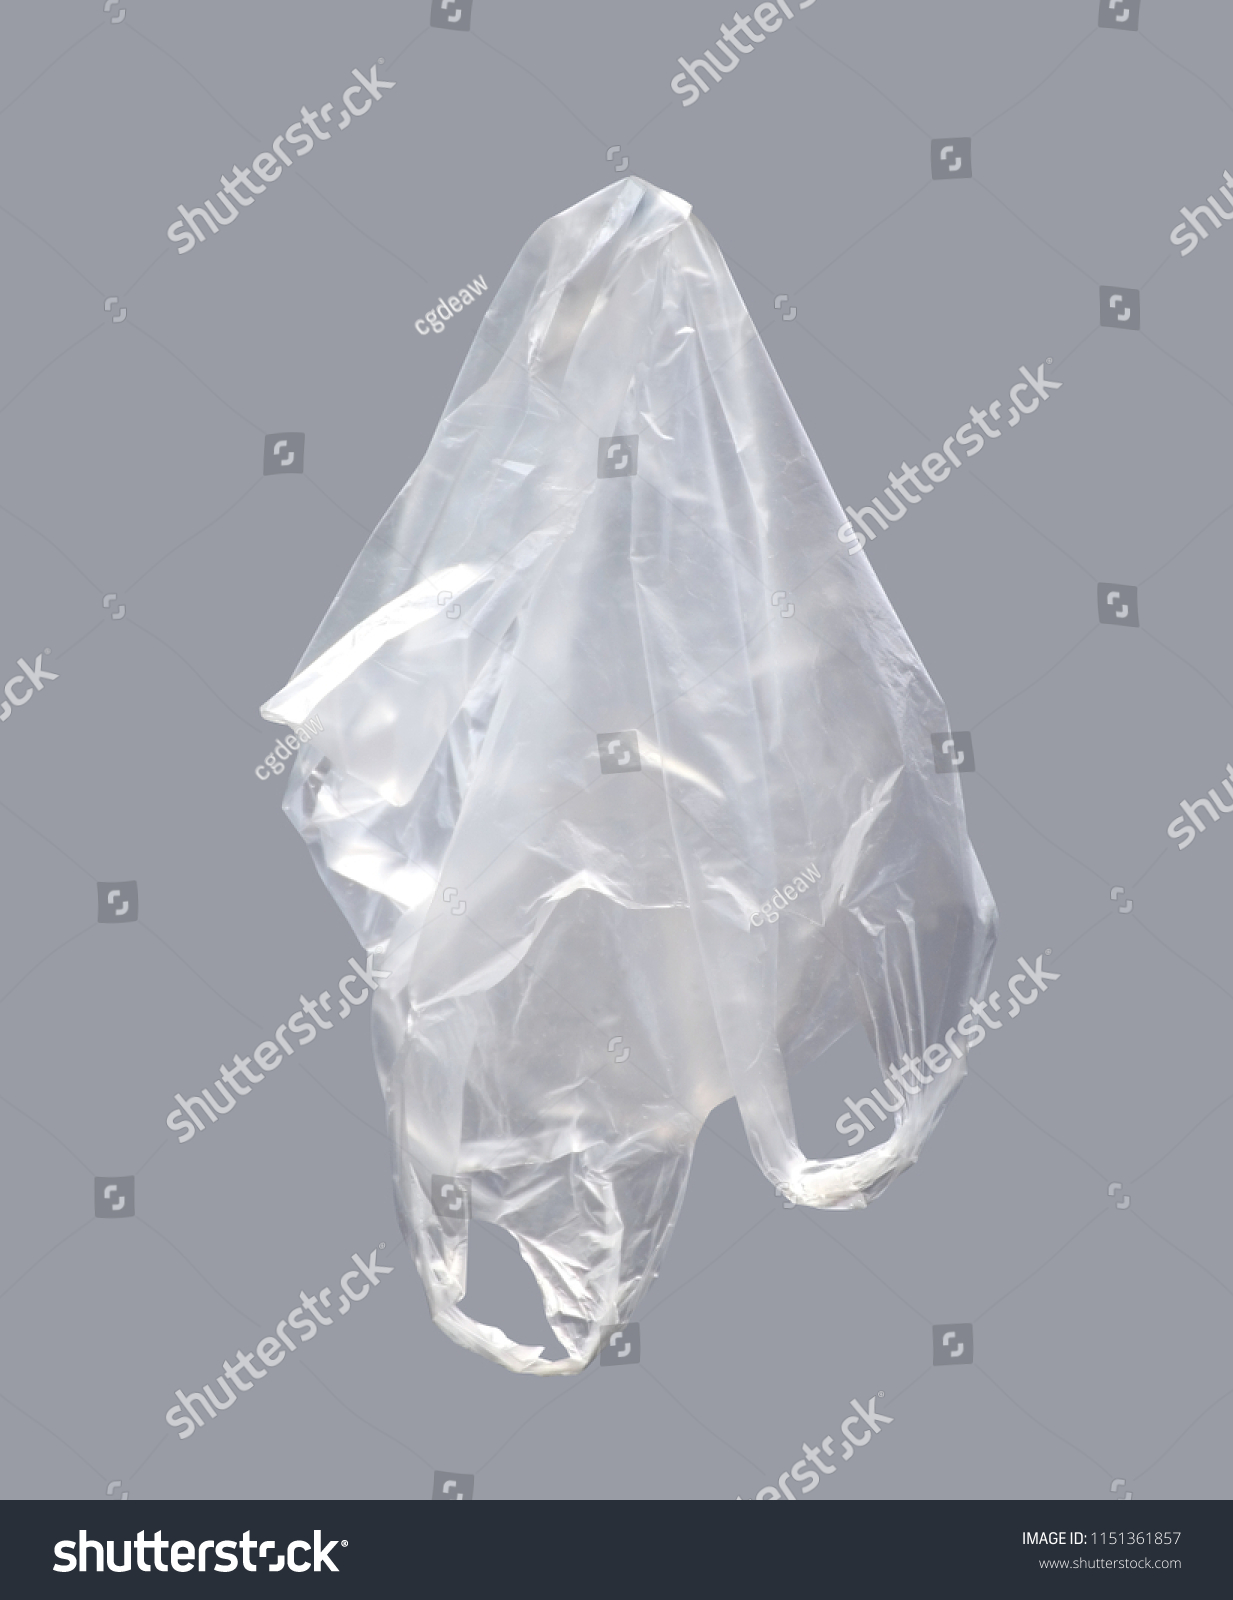 Plastic bag, Clear plastic bag on gray background, Plastic bag clear waste, Plastic bag clear garbage, Pollution from garbage waste bags #1151361857